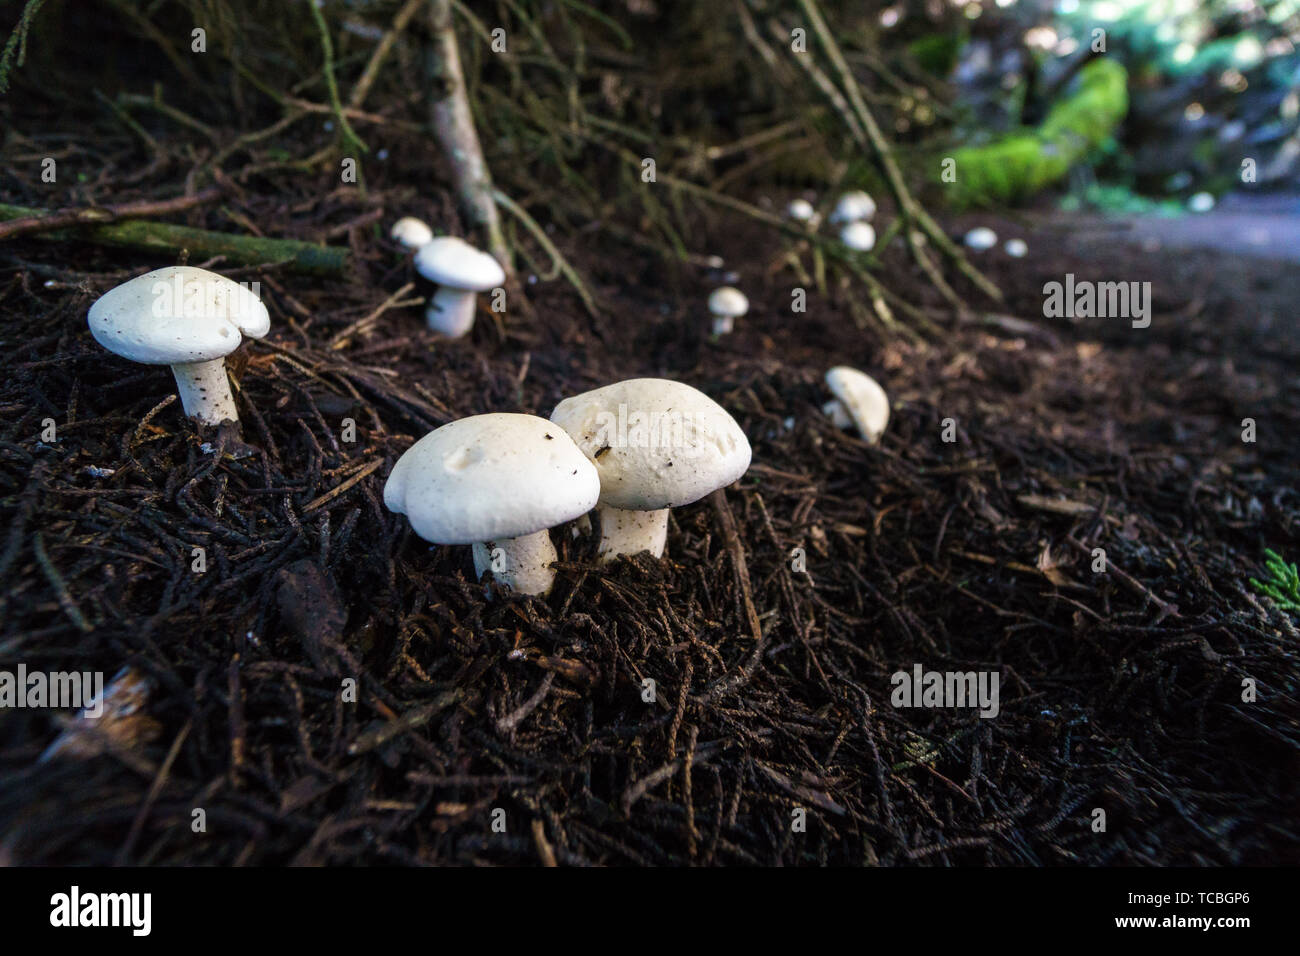 white mushrooms growing in forest canopy Stock Photo